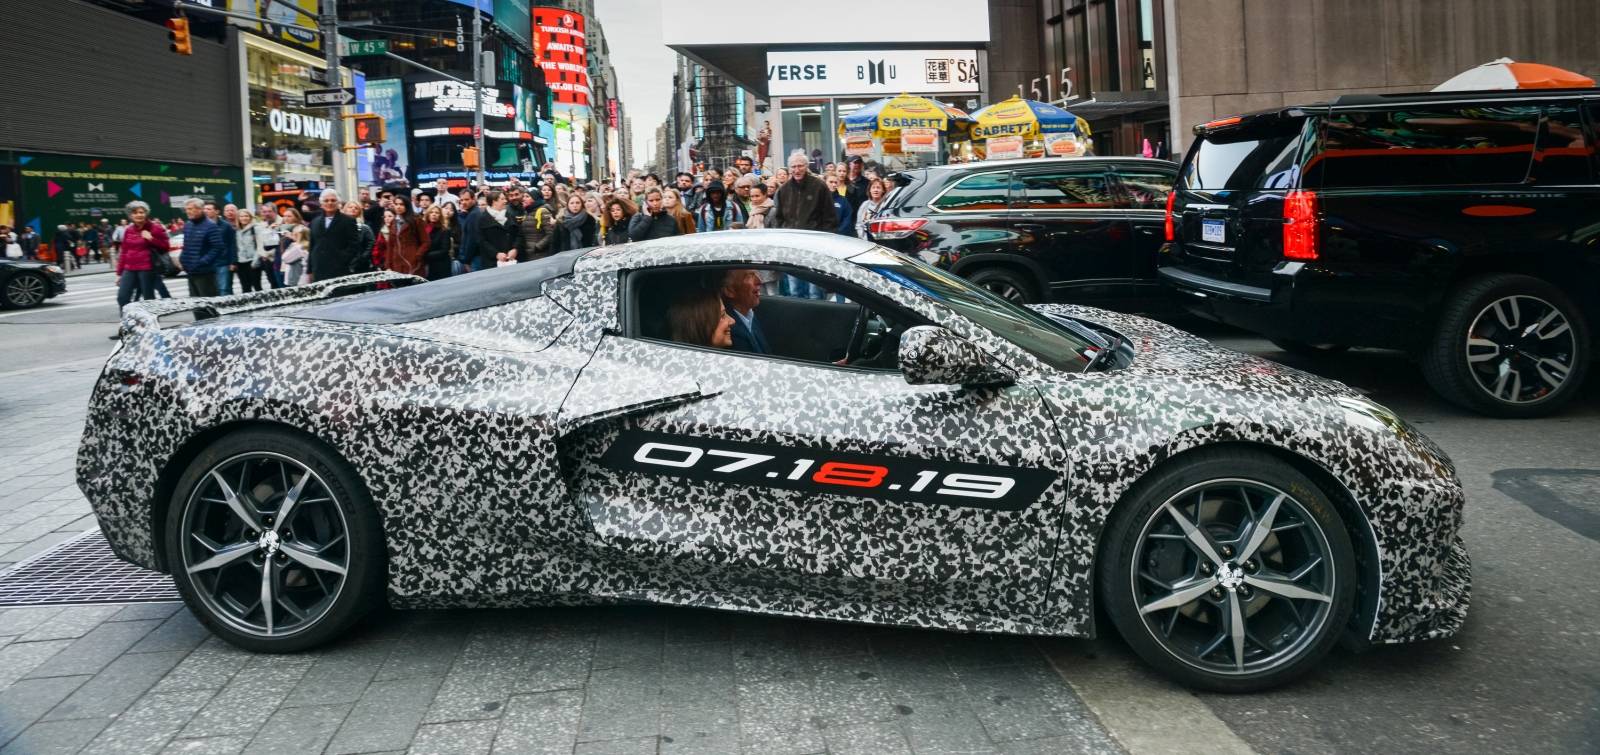 Chevrolet Corvette Chief Engineer Tadge Juechter and General Motors Chairman and CEO Mary Barra drive in a camouflaged next generation Corvette down 7th Avenue near Times Square Thursday, April 11, 2019 in New York, New York. The next generation Corvette will be unveiled on July 18. (Photo by Jennifer Altman for Chevrolet)